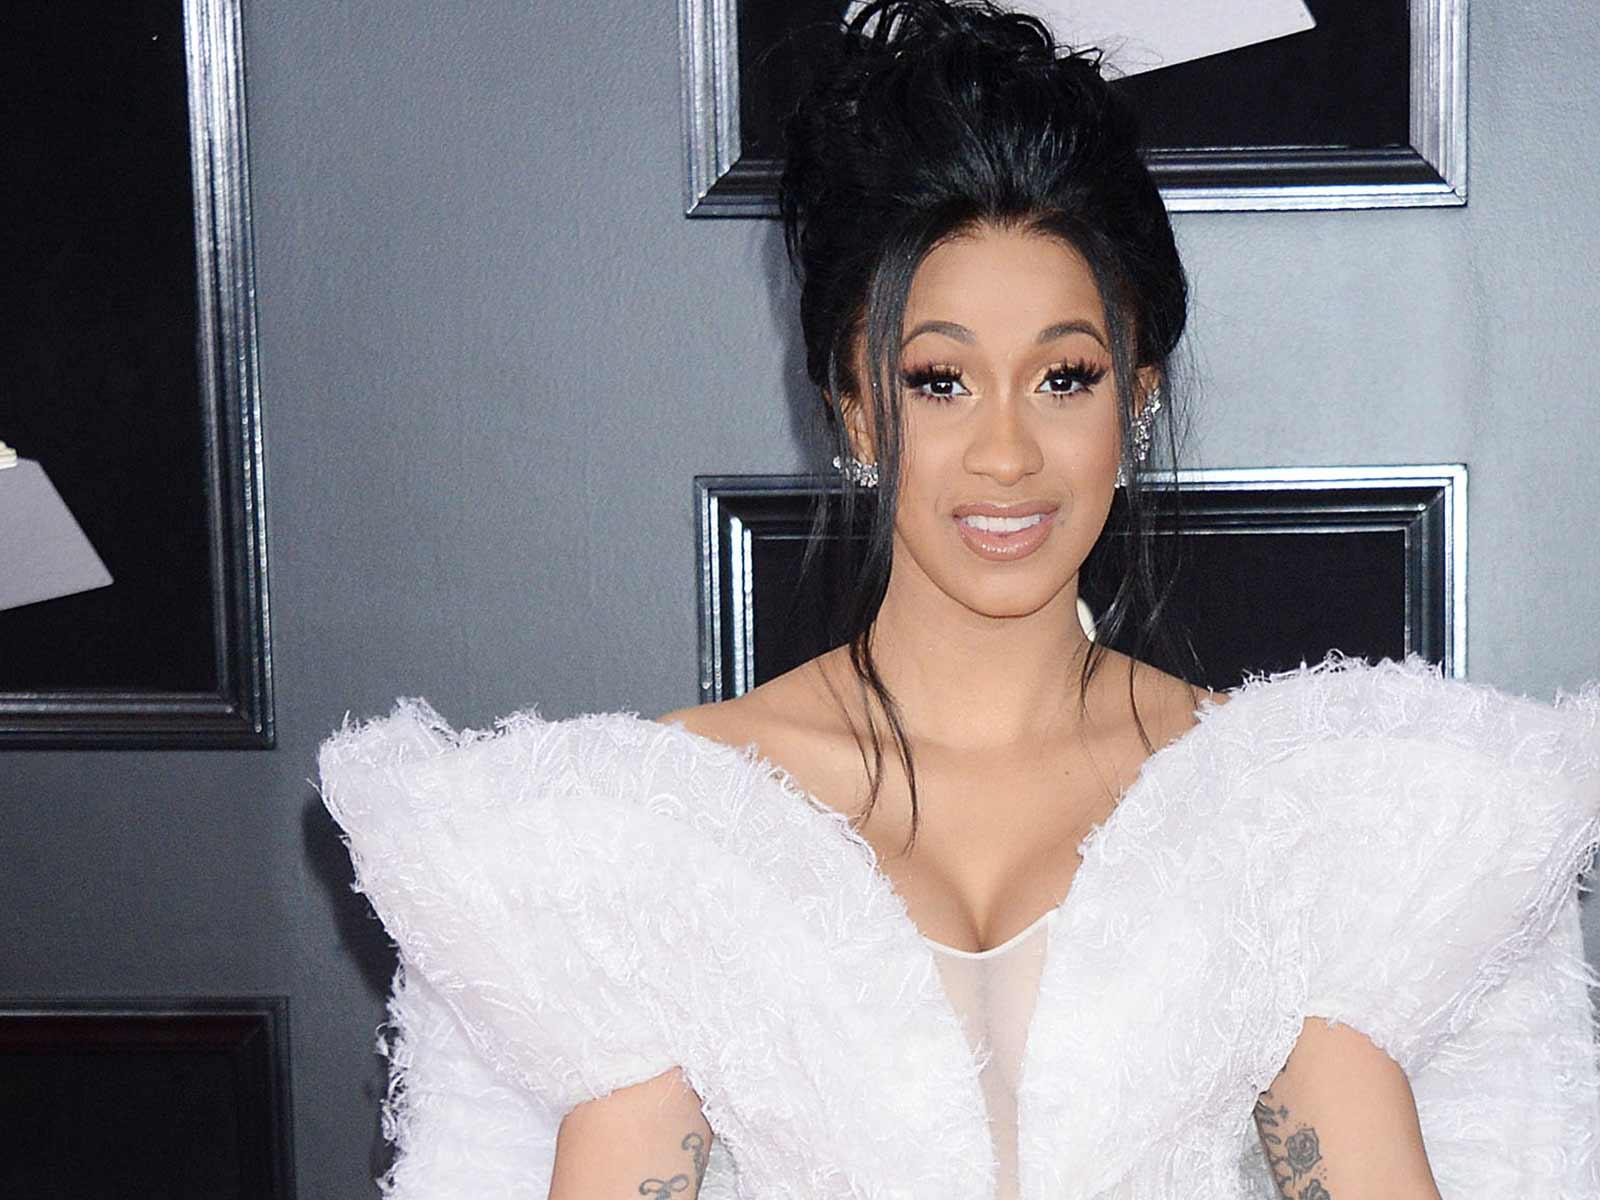 Cardi B Accuses Inked Up Model of Wanting a ‘Free Ride’ On ‘Famous Coat-Tails’